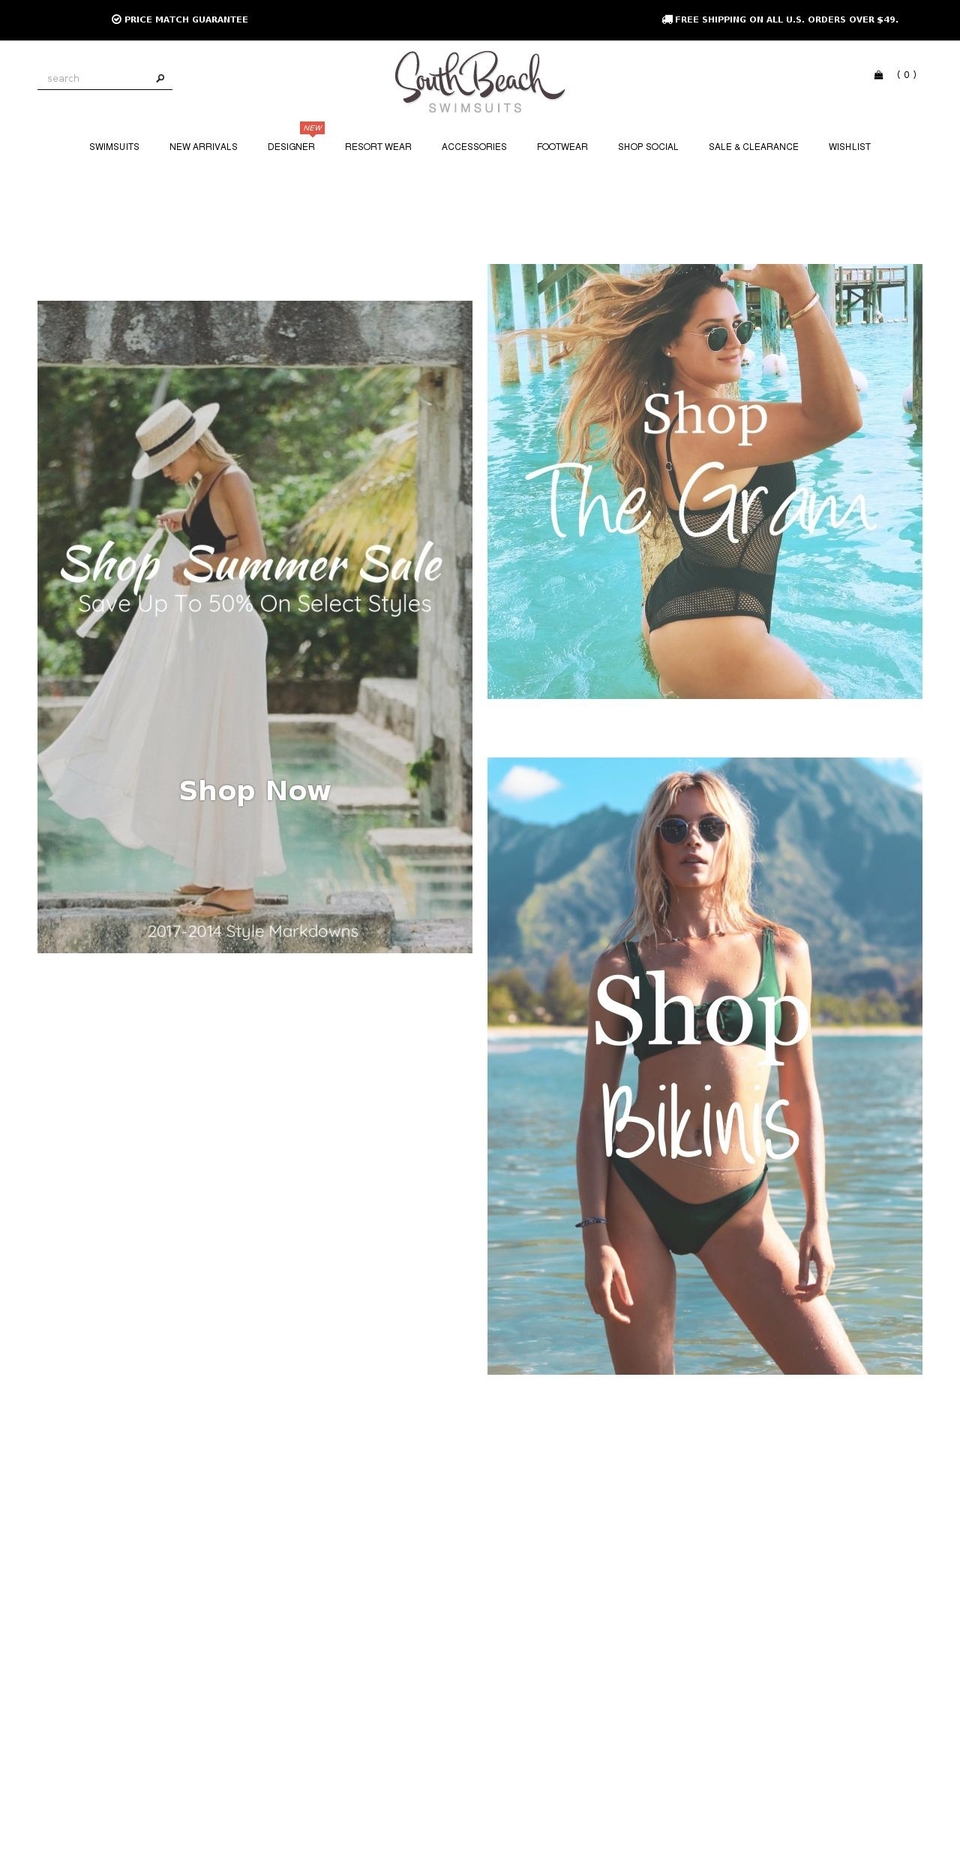 Made With ❤ By Minion Made - Updated Checkout Shopify theme site example swimwearrack.net